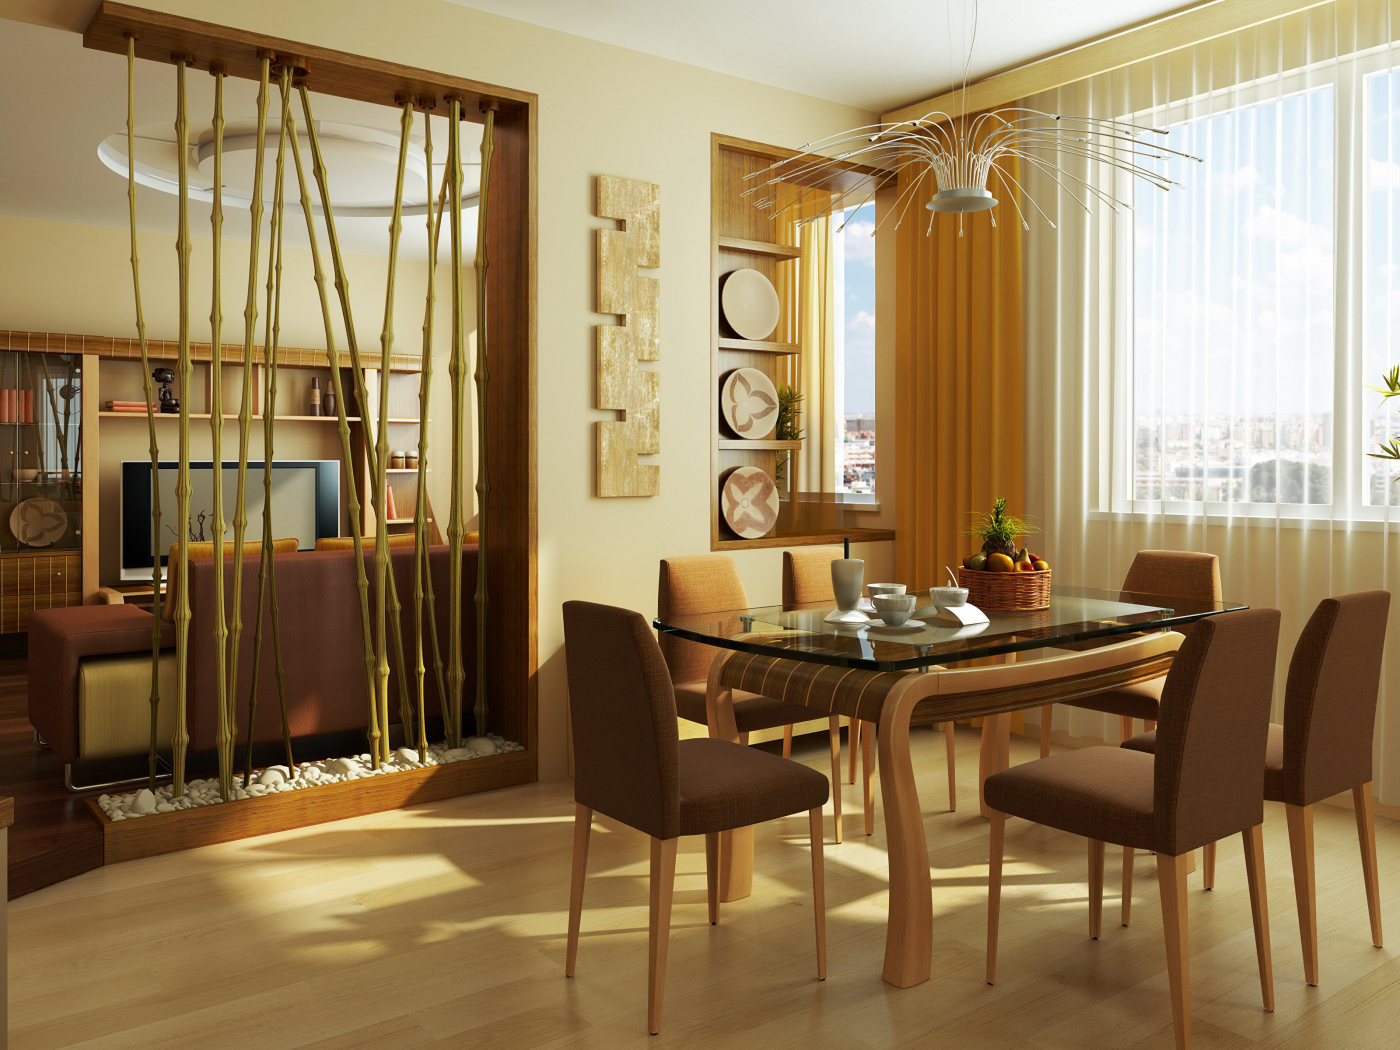 Dining area with dining table and chairs by the window